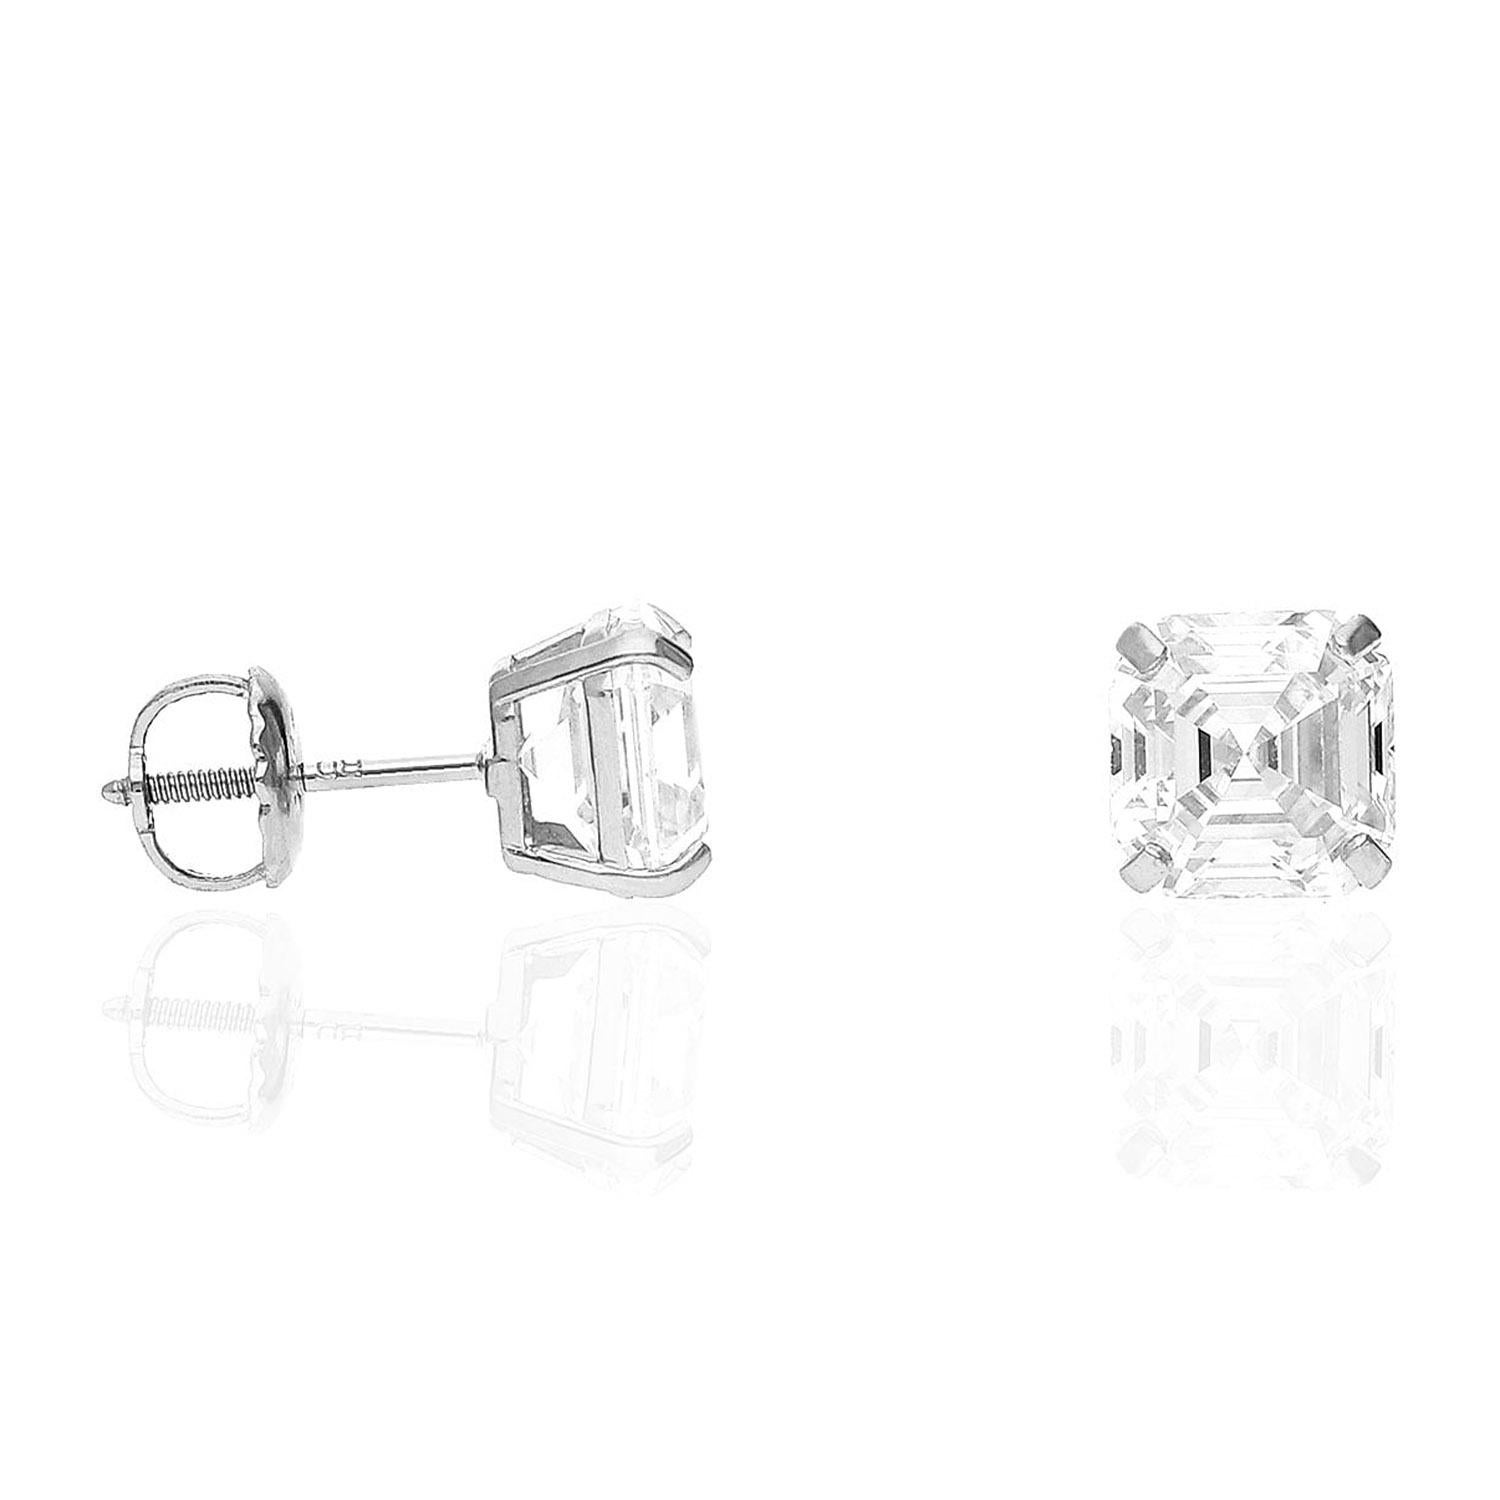  2.09ctw pair of asscher cut diamonds is gorgeously sophisticated and is exceptionally clean with VS1 clarity! The diamonds are graded J-K for color, and they face up with very minimal warmth. The very subtle hint of color is overwhelmed by the